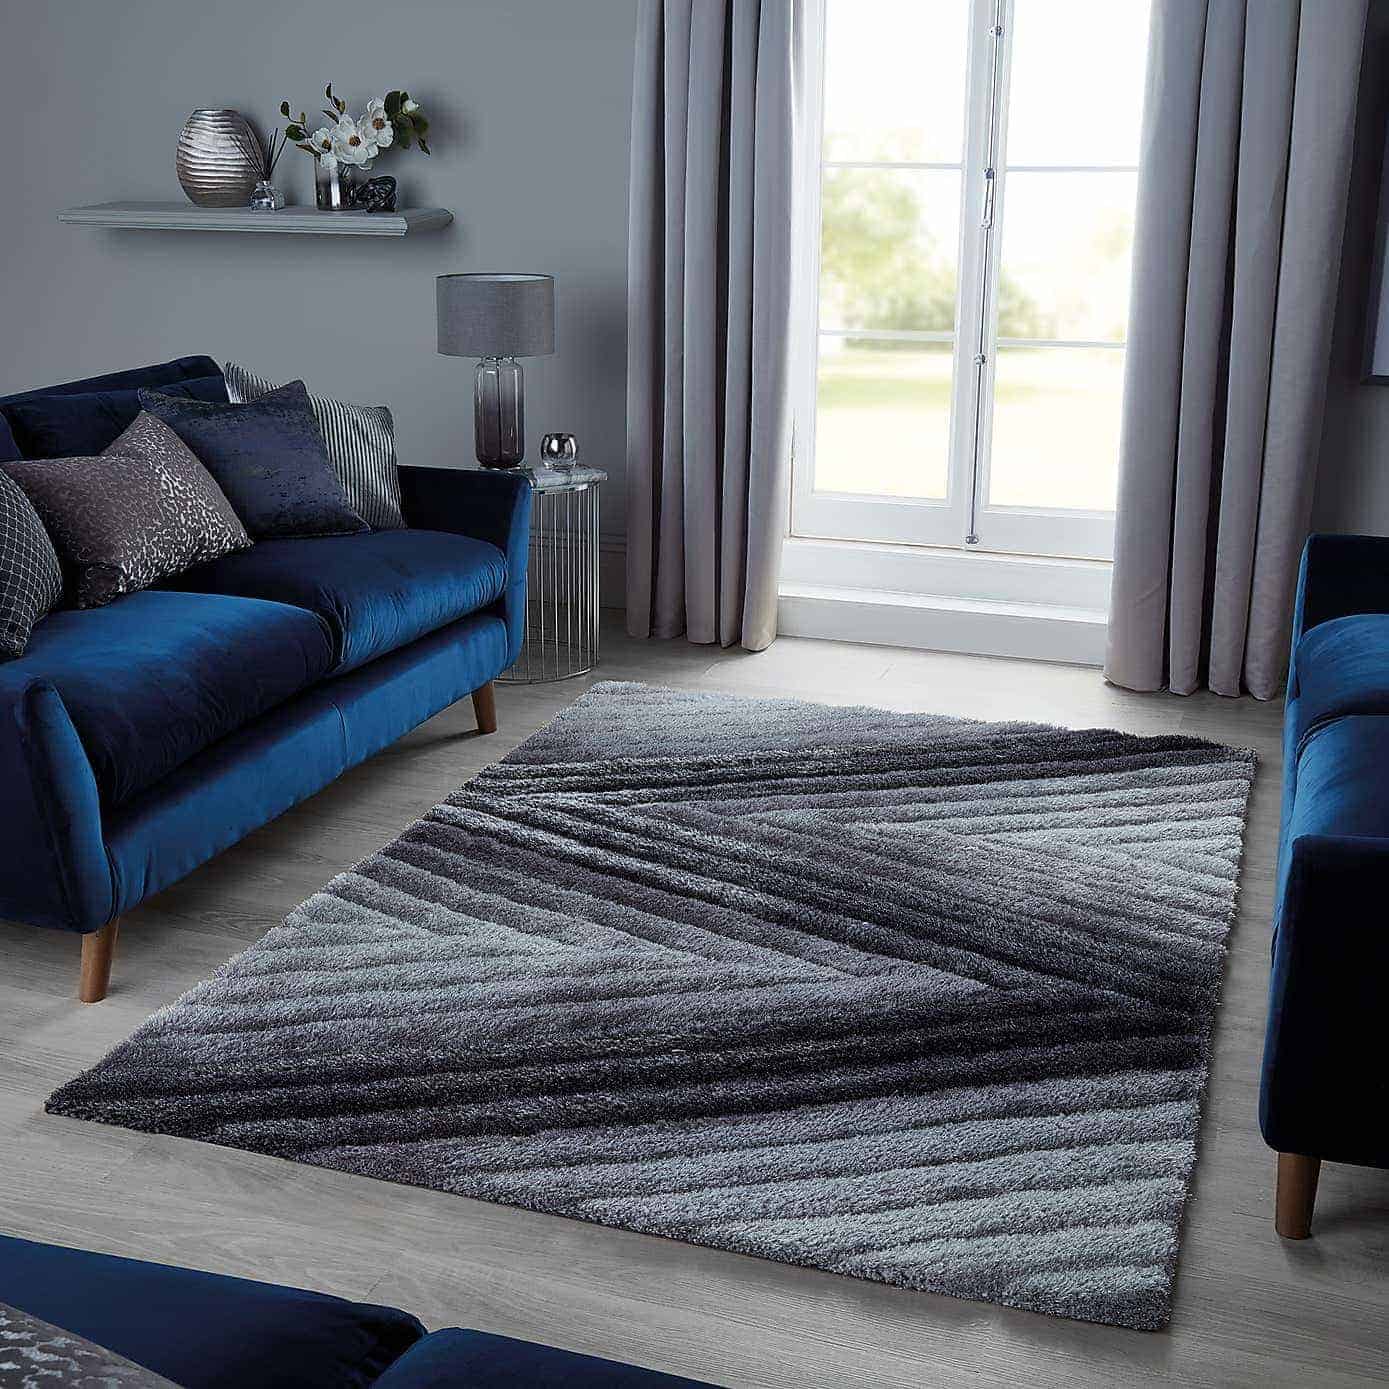 black and grey rug with blue sofas